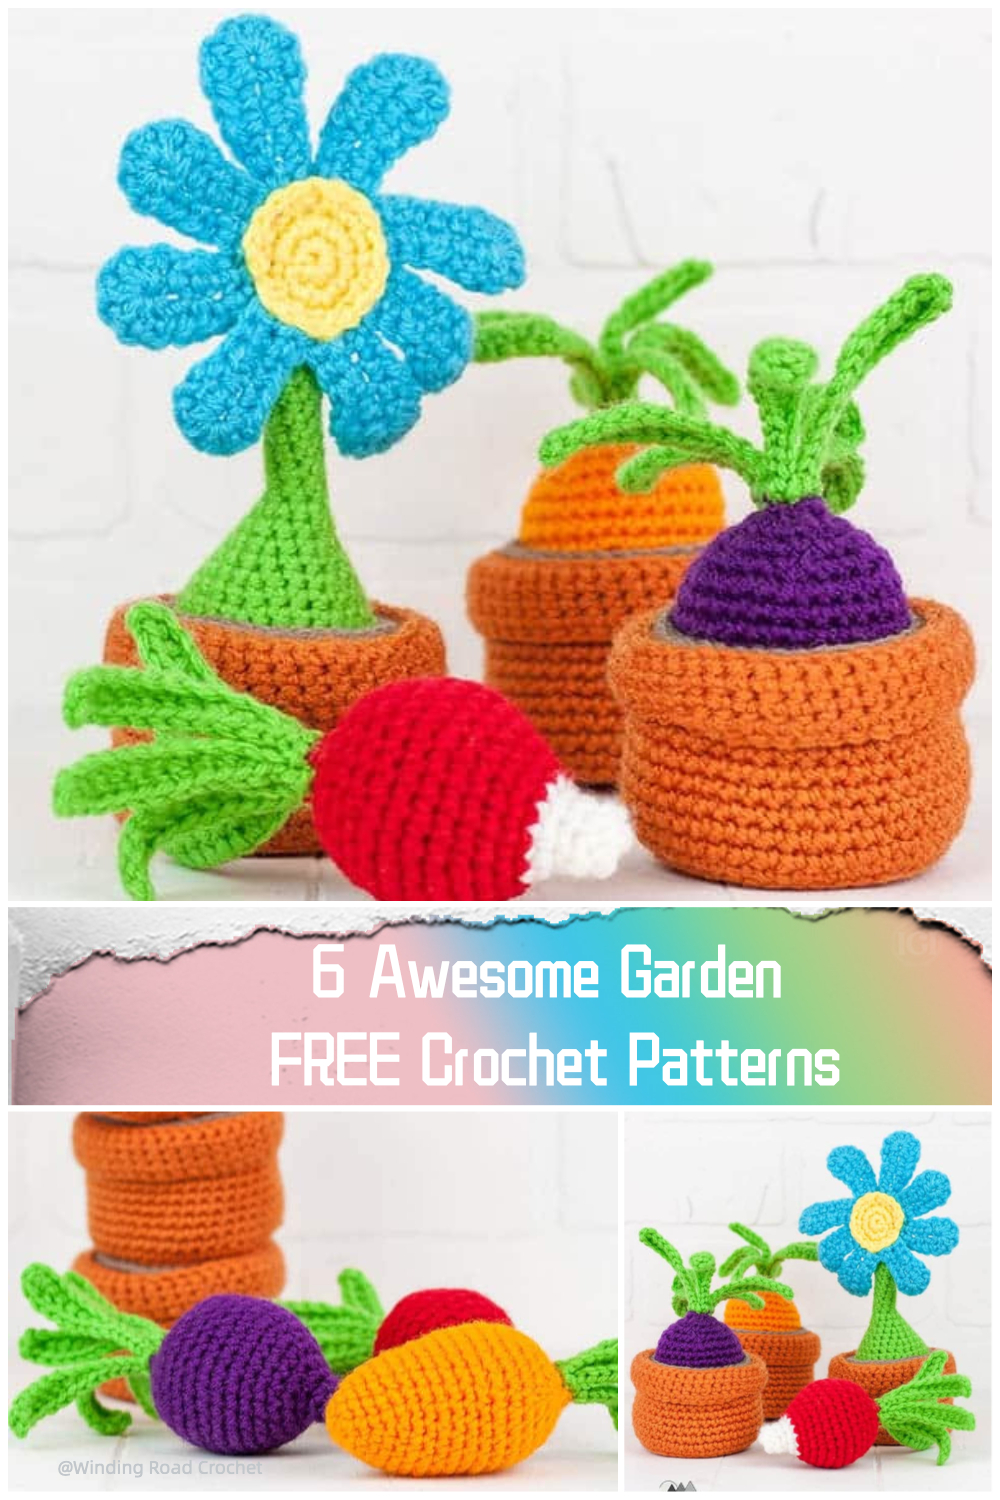 6 Awesome Garden FREE Crochet Patterns